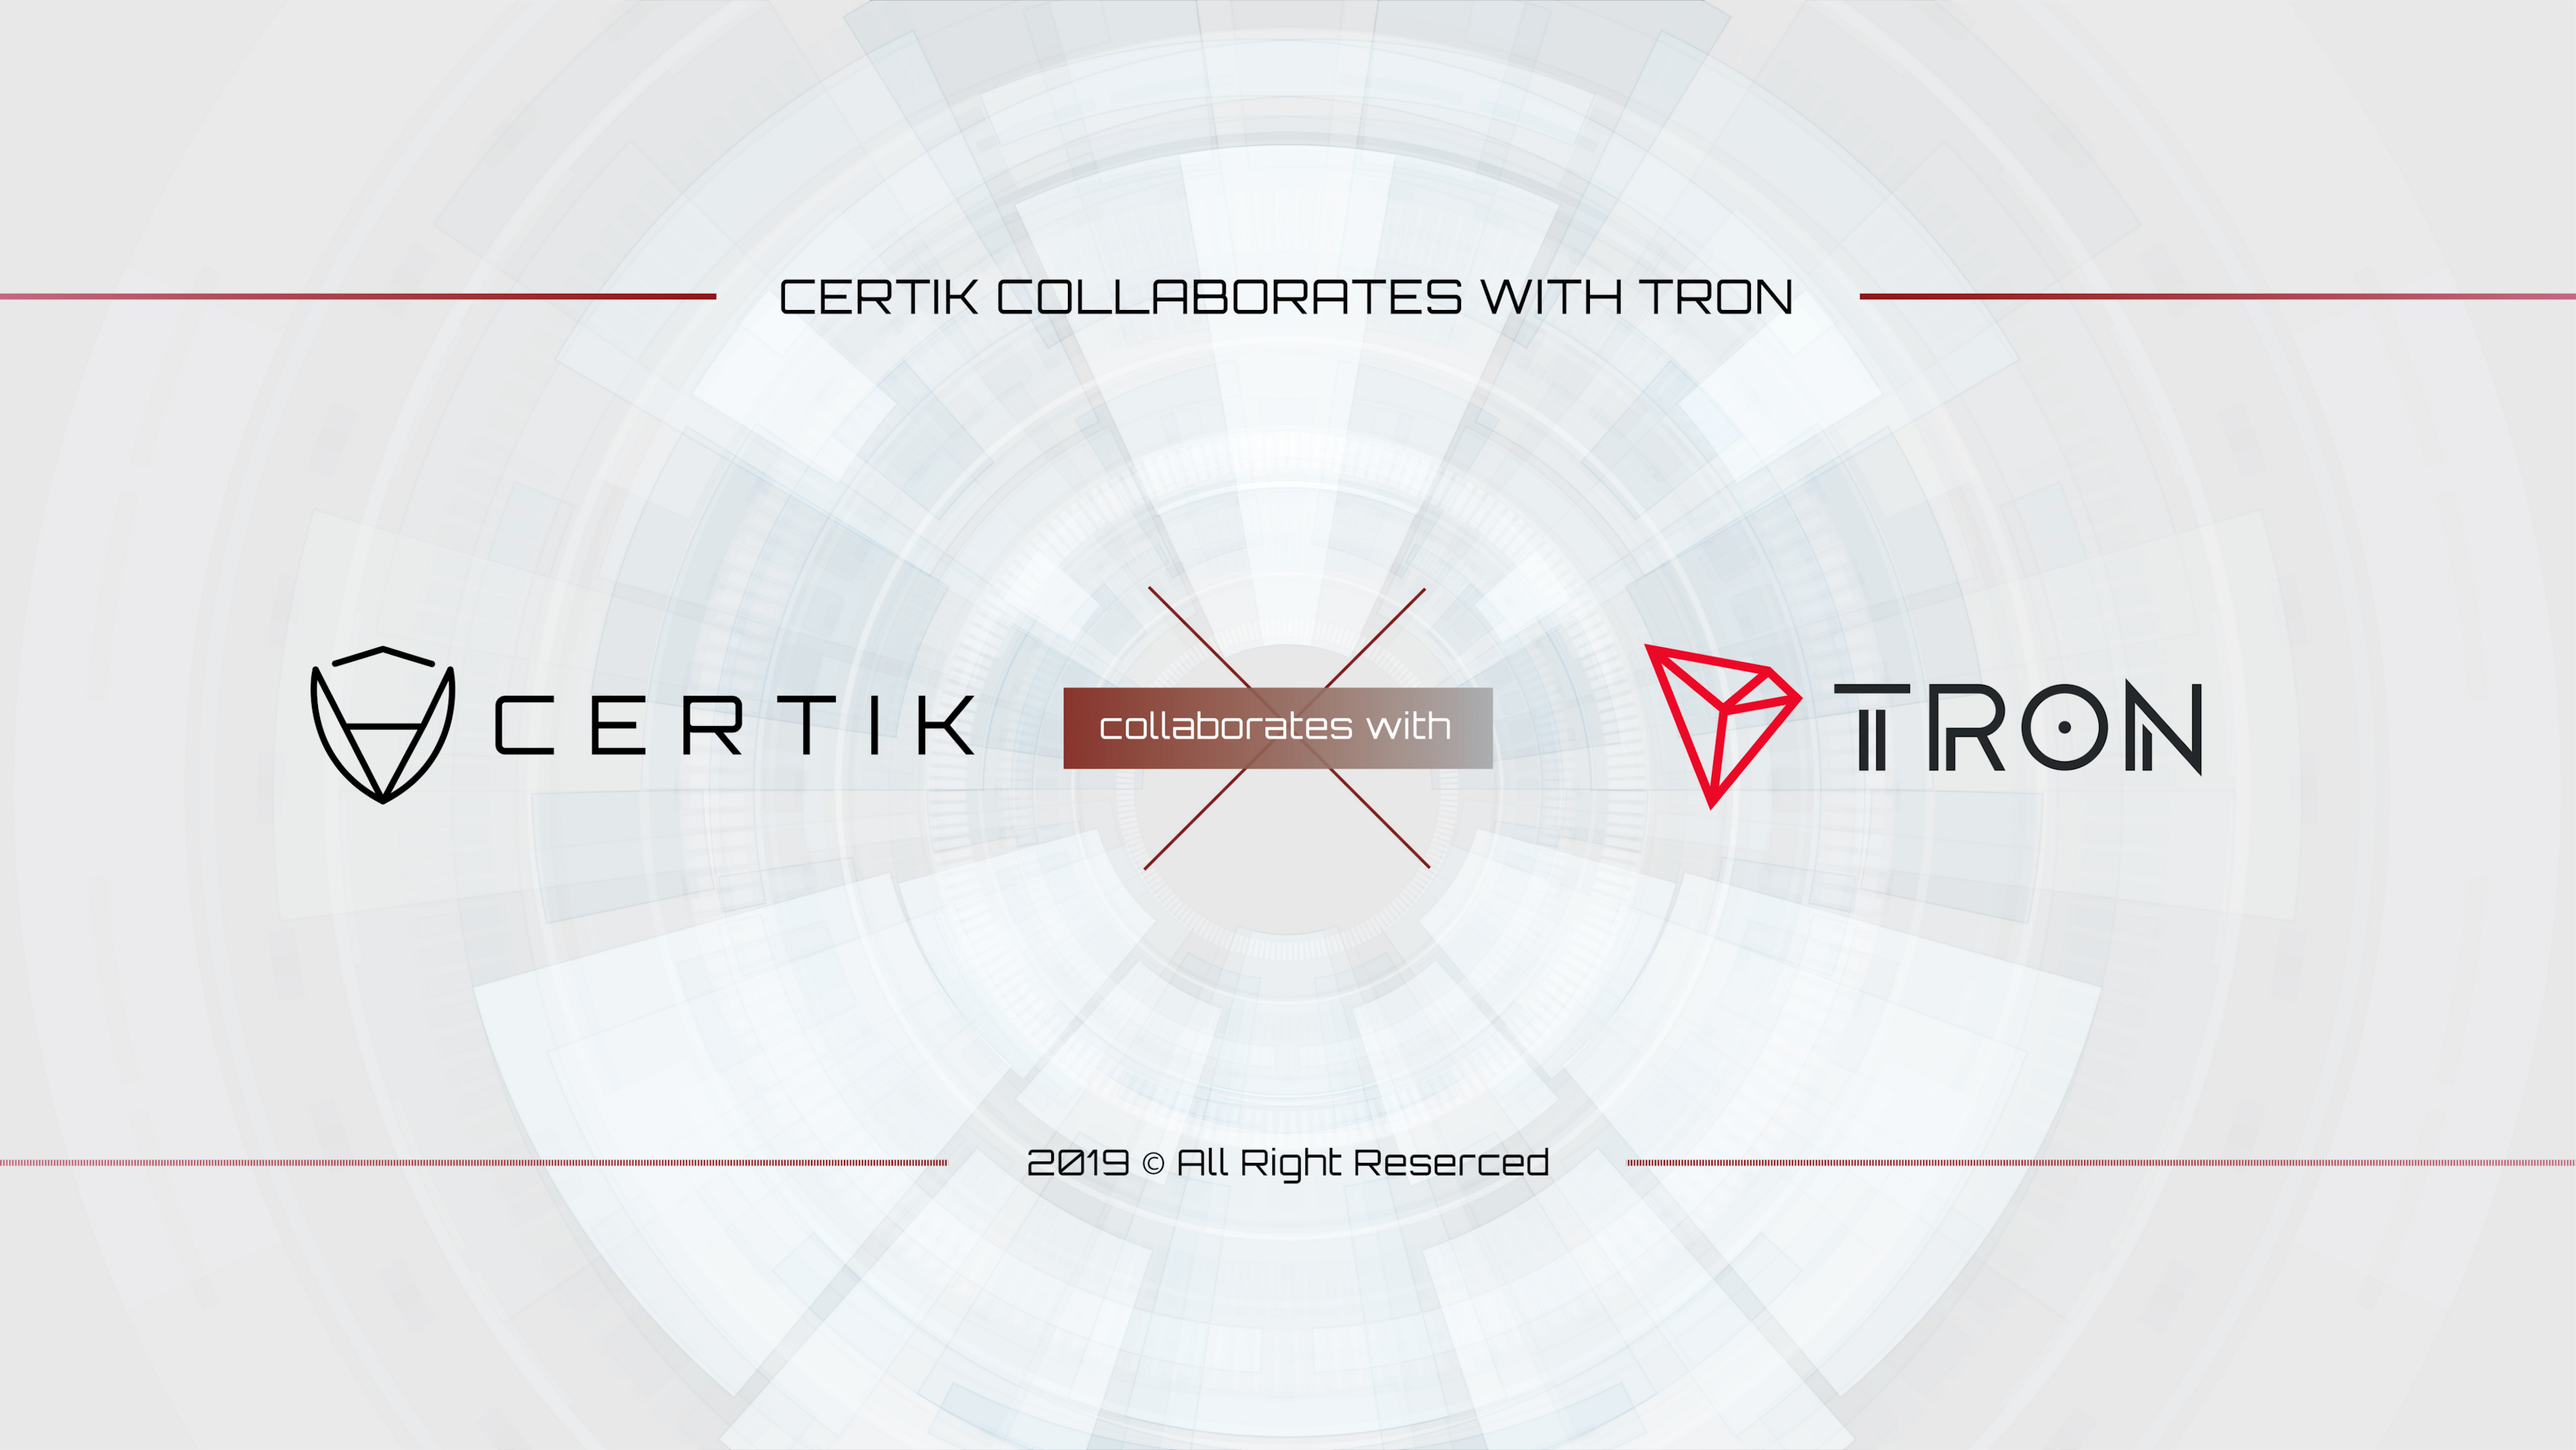 CertiK and TRON are Collaborating